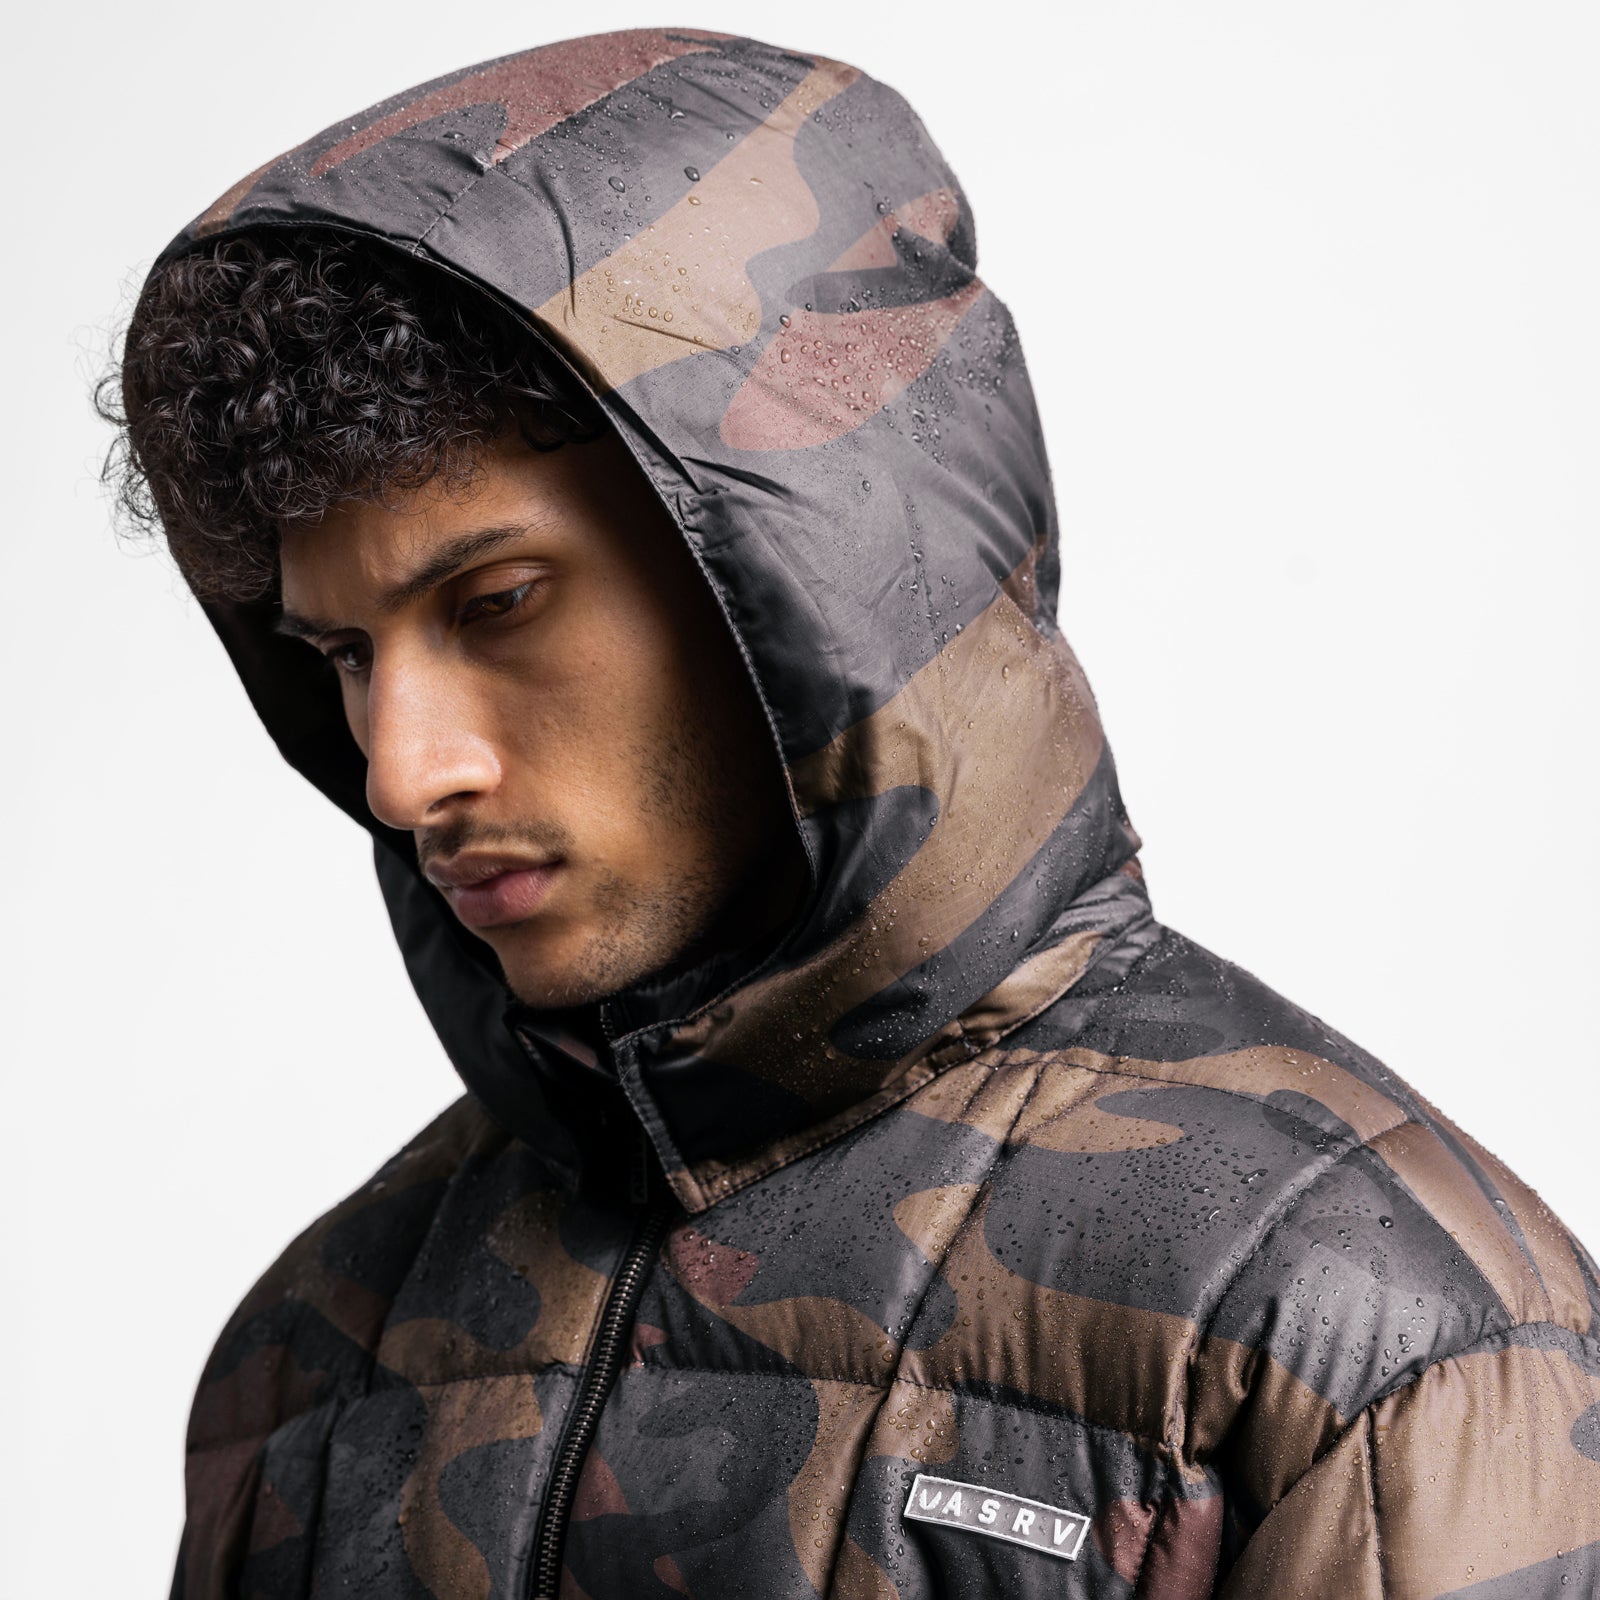 0551. Weather-Ready Down Puffer Jacket - Rust Camo – ASRV